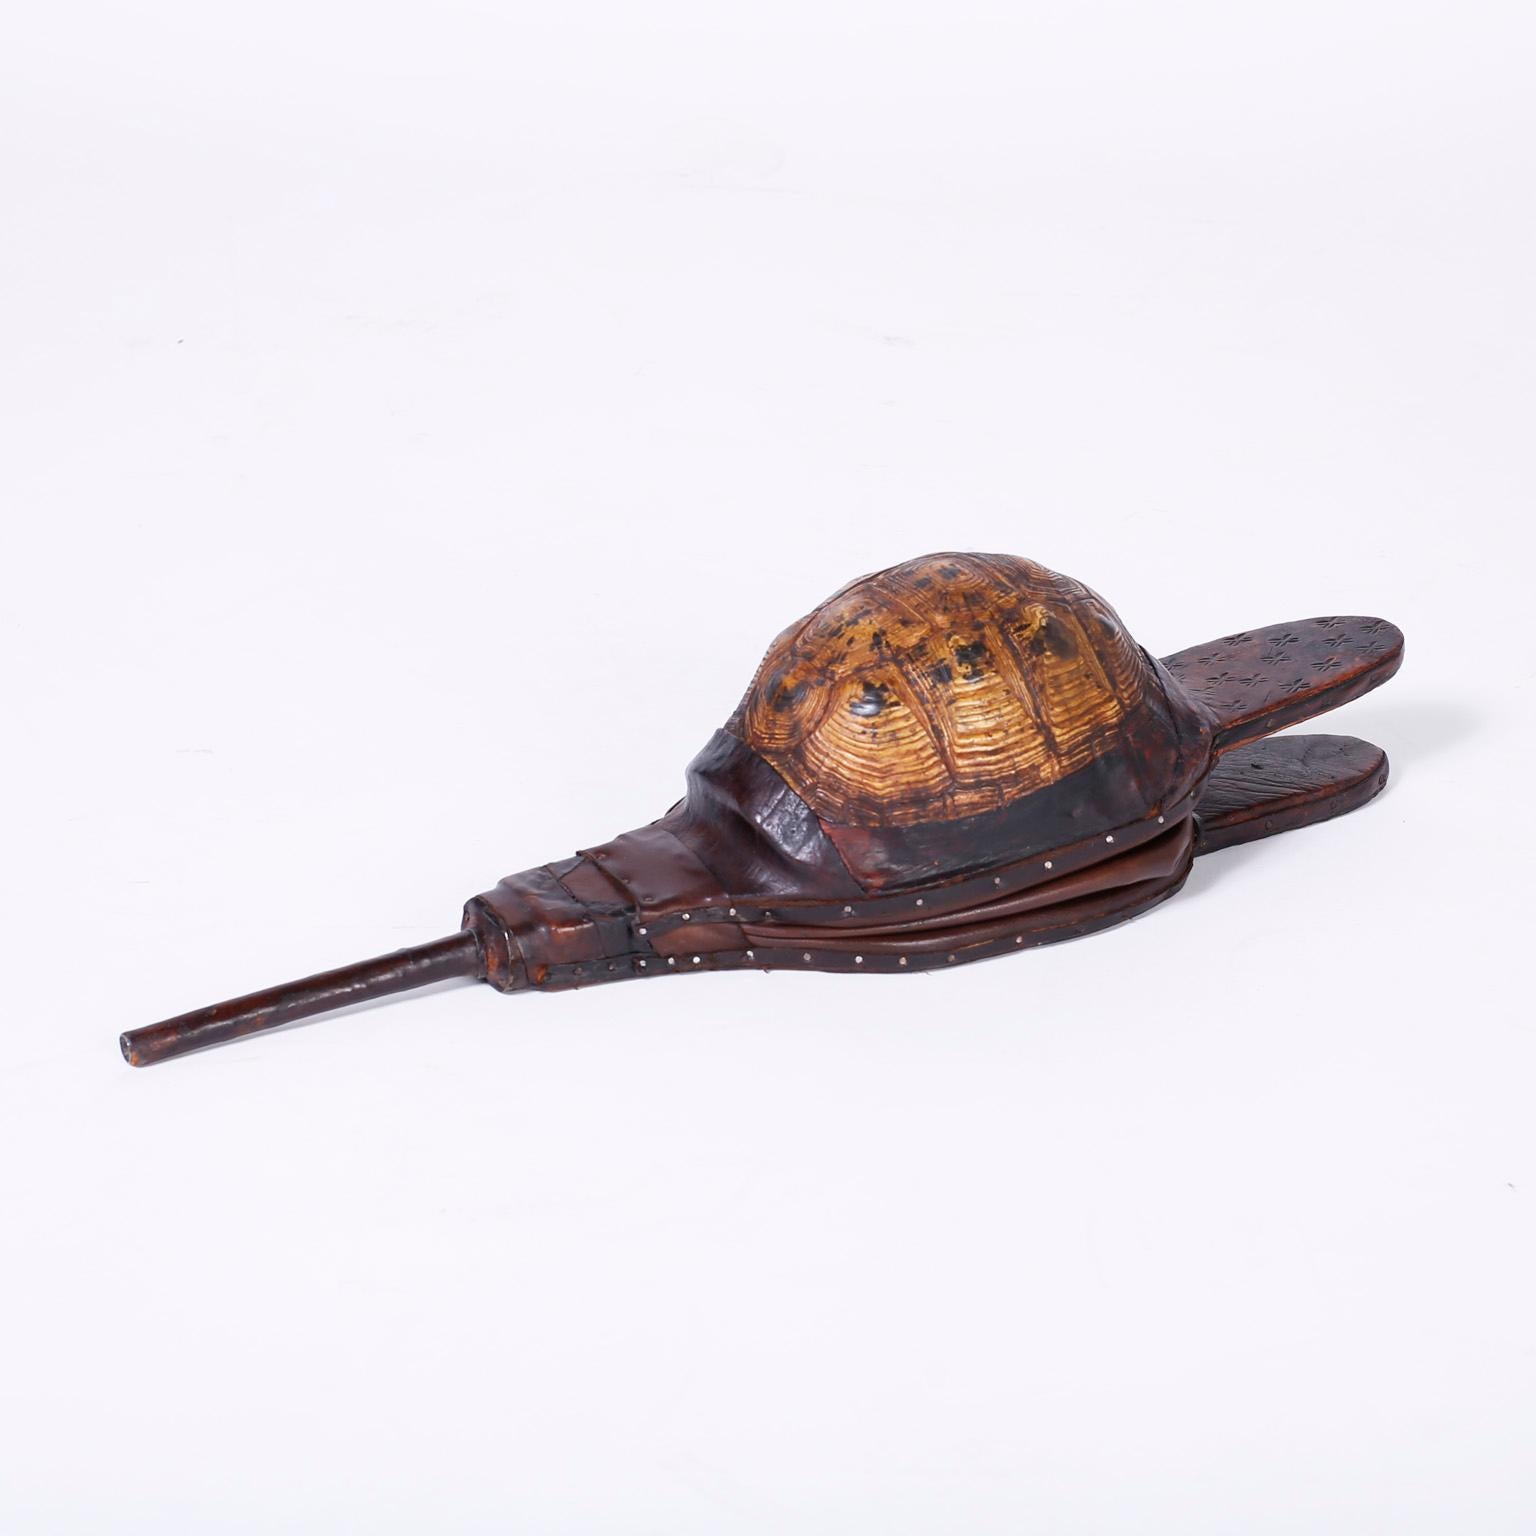 Here is an unusual and rare trio of functioning antique bellows crafted in wood leather and turtle shells with a rustic form and beautiful aged patina. No household is complete without them. Priced individually. 

Measures: Larger tortoiseshell H